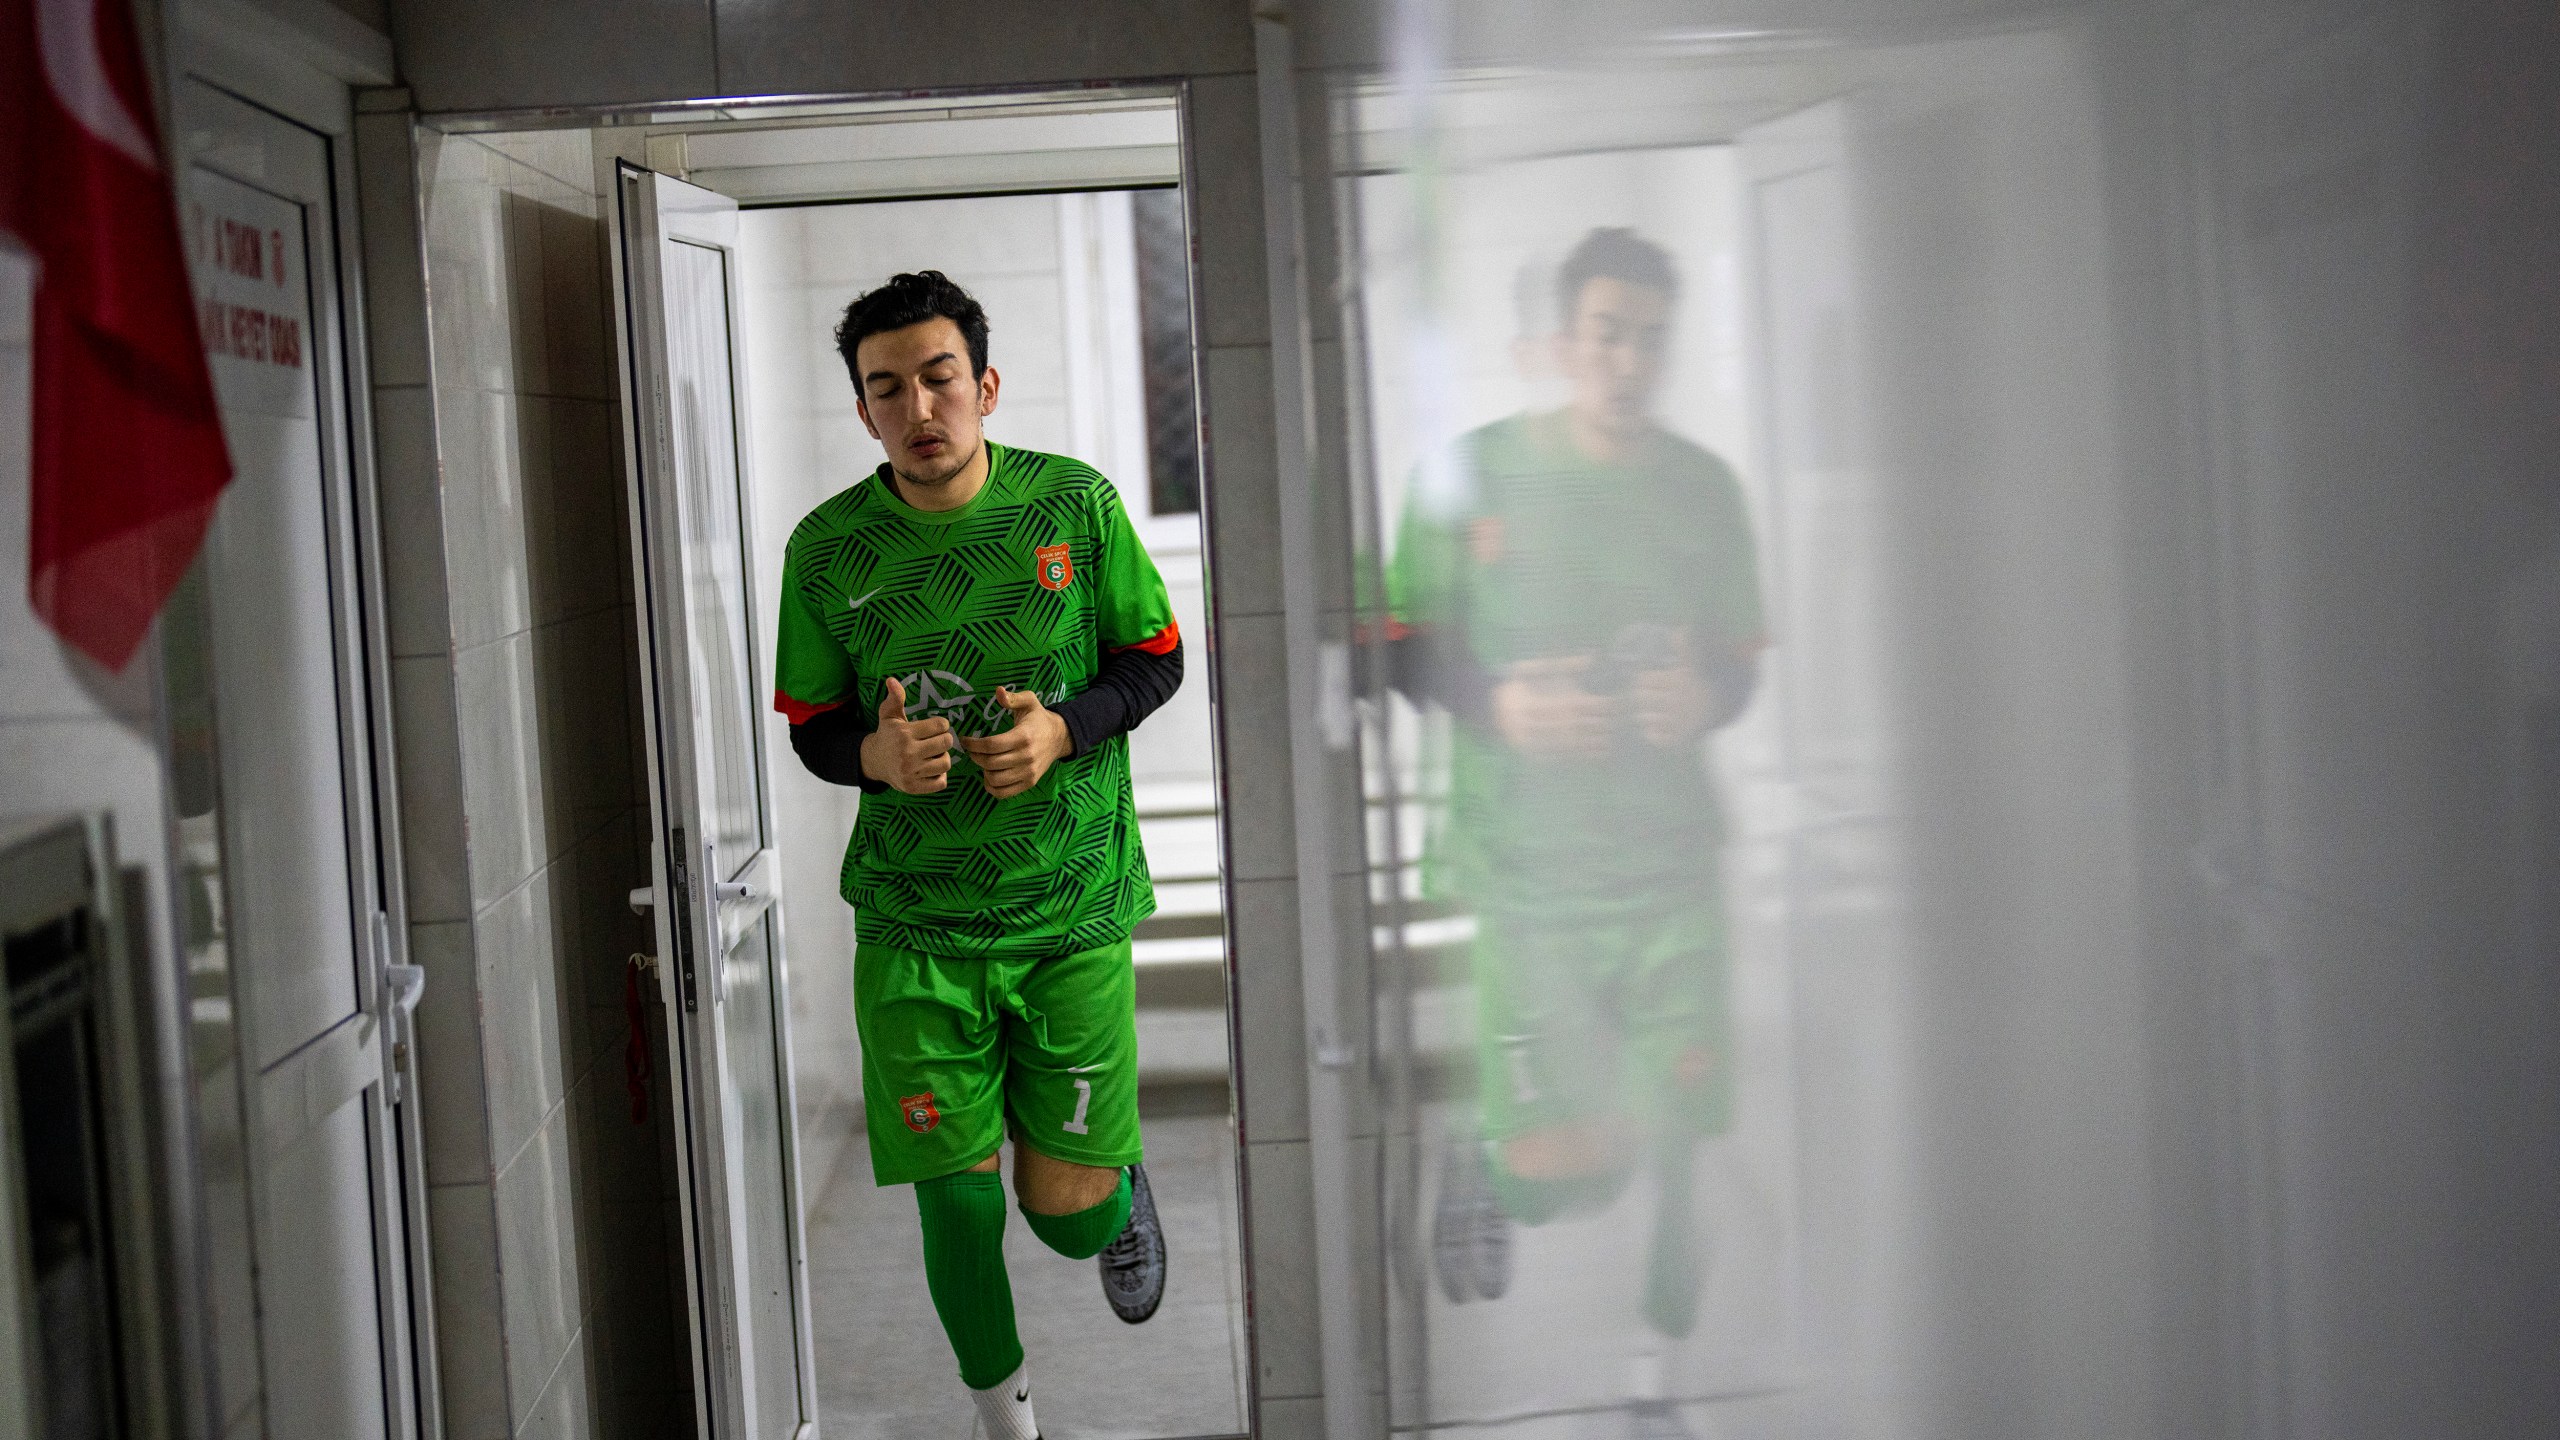 Amateur goalkeeper Mustafa Mert Olcer leaves the locker room before playing a recreational soccer "Astroturf" match in Istanbul, Turkey, Tuesday, March 5, 2024. More than a few times a week, the 18-year-old courier and passionate goalkeeper Mustafa Mert Olcer, gets a call from Rent-a-Goalkeeper to man a goalpost. (AP Photo/Francisco Seco)